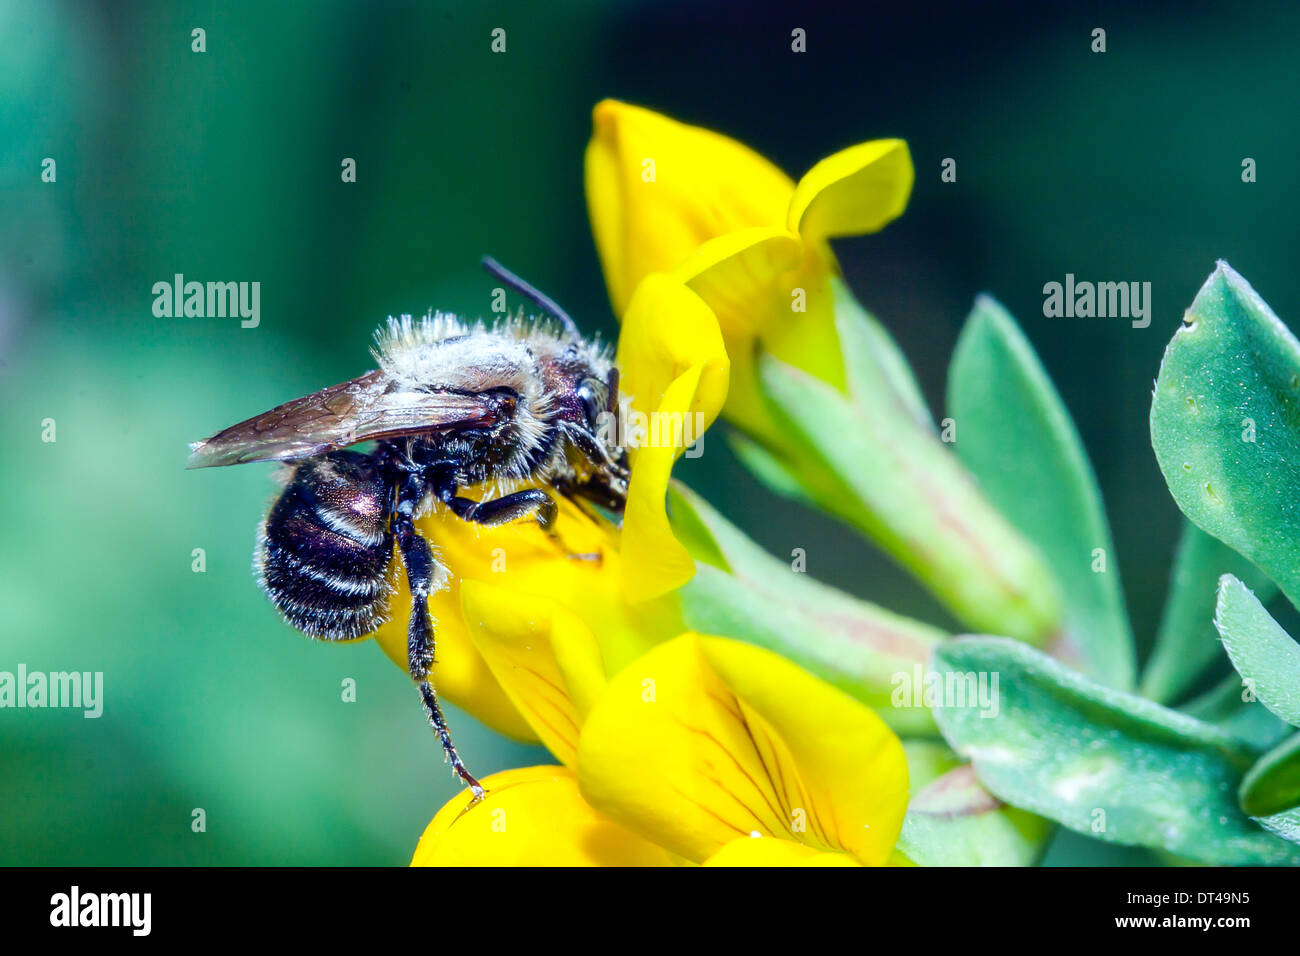 common bee collects pollen from flowers in a meadow Stock Photo